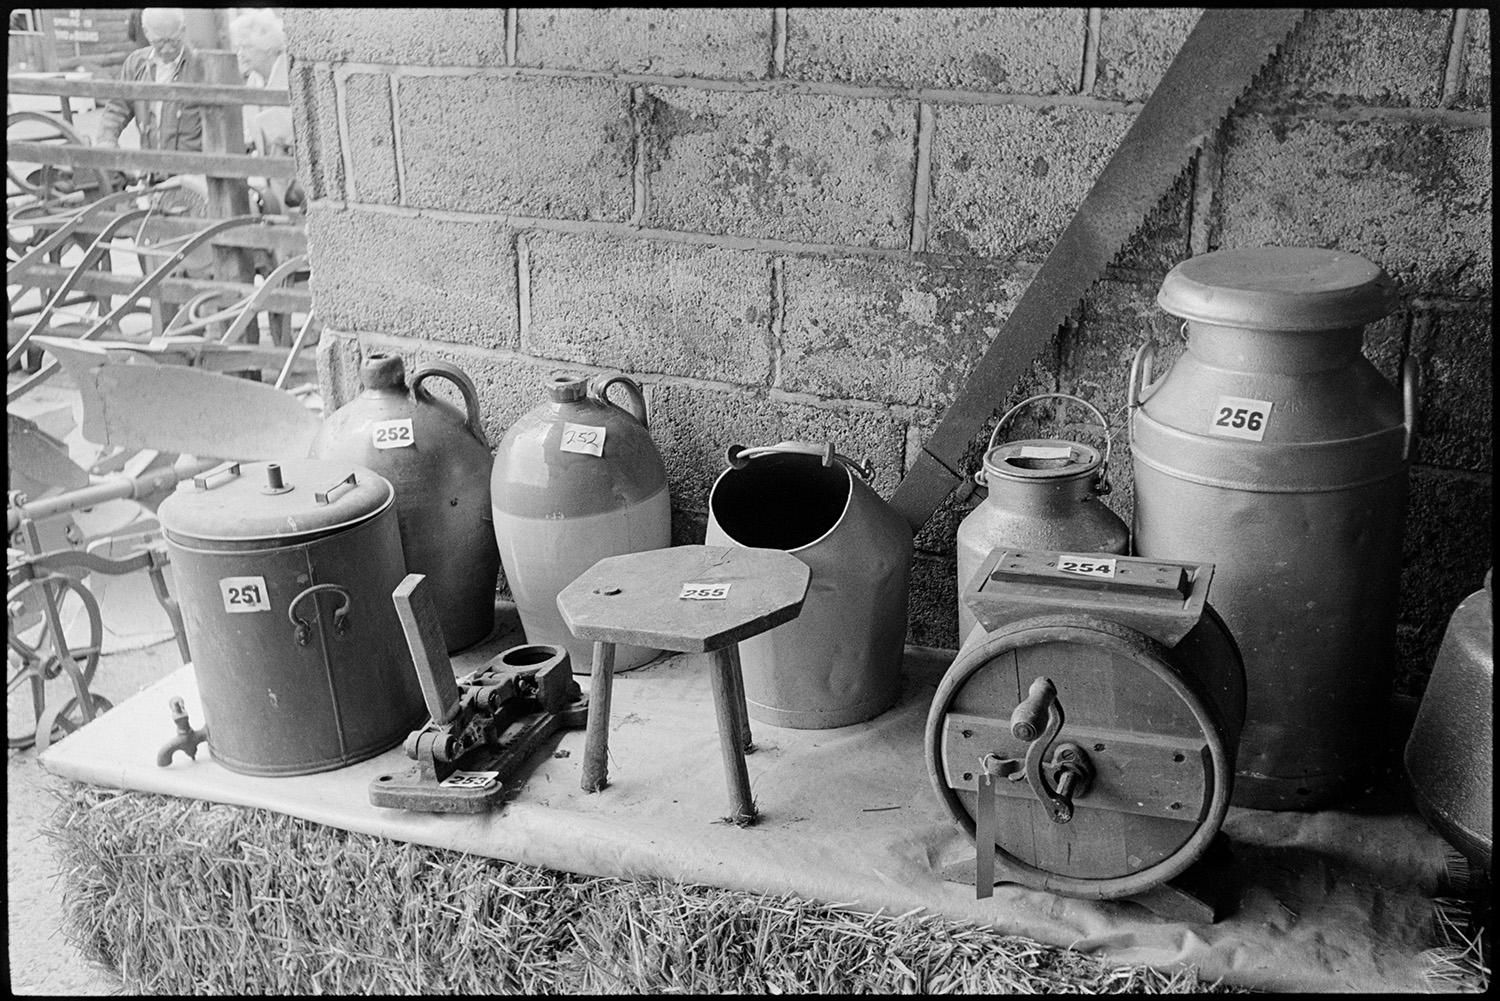 Sale of agricultural museum collection, signs, implements, machinery on display. Woodpile.
[Jugs, milk churns, stool and hand operated mixer being sold from the Ashley Collection at Hollocombe. The items are displayed on top of a hay bale.]